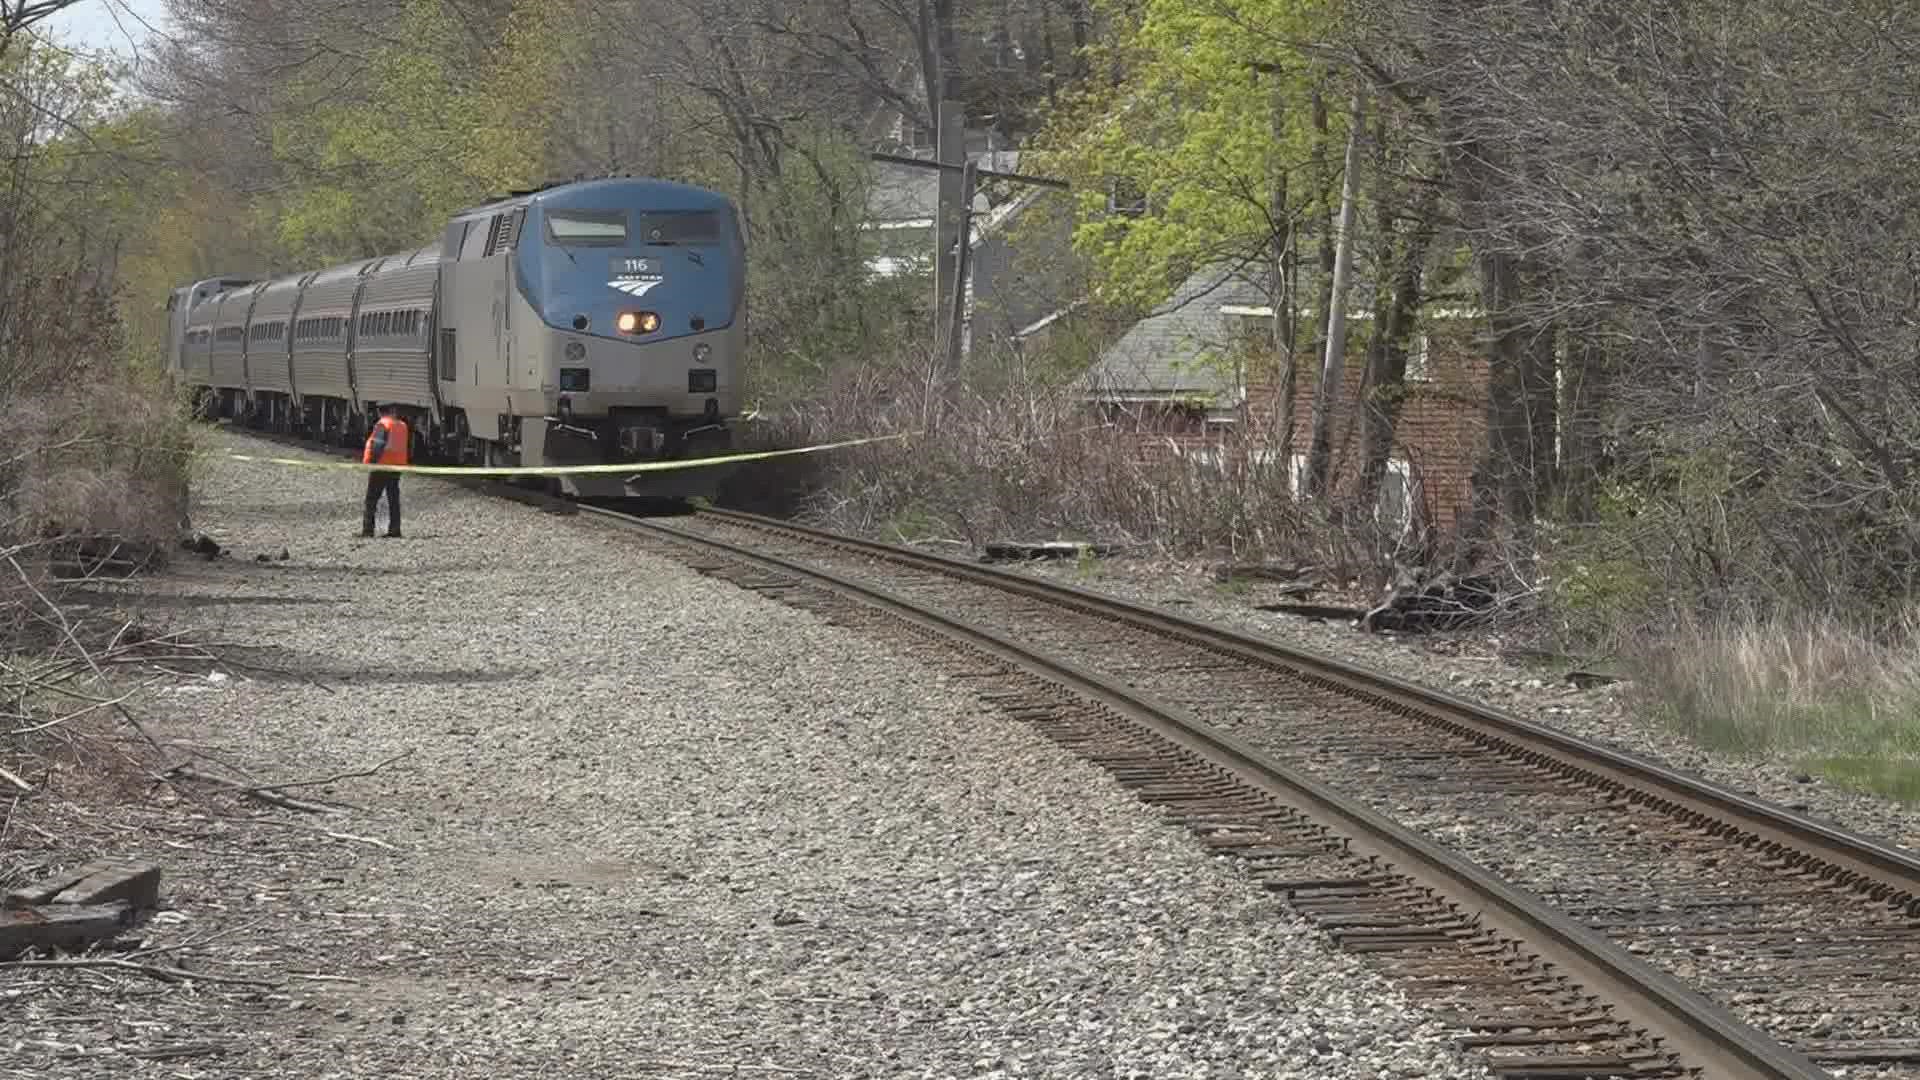 Two people died after being struck by an Amtrak train Sunday in Biddeford, a Biddeford Police Department dispatcher confirmed to NEWS CENTER Maine.